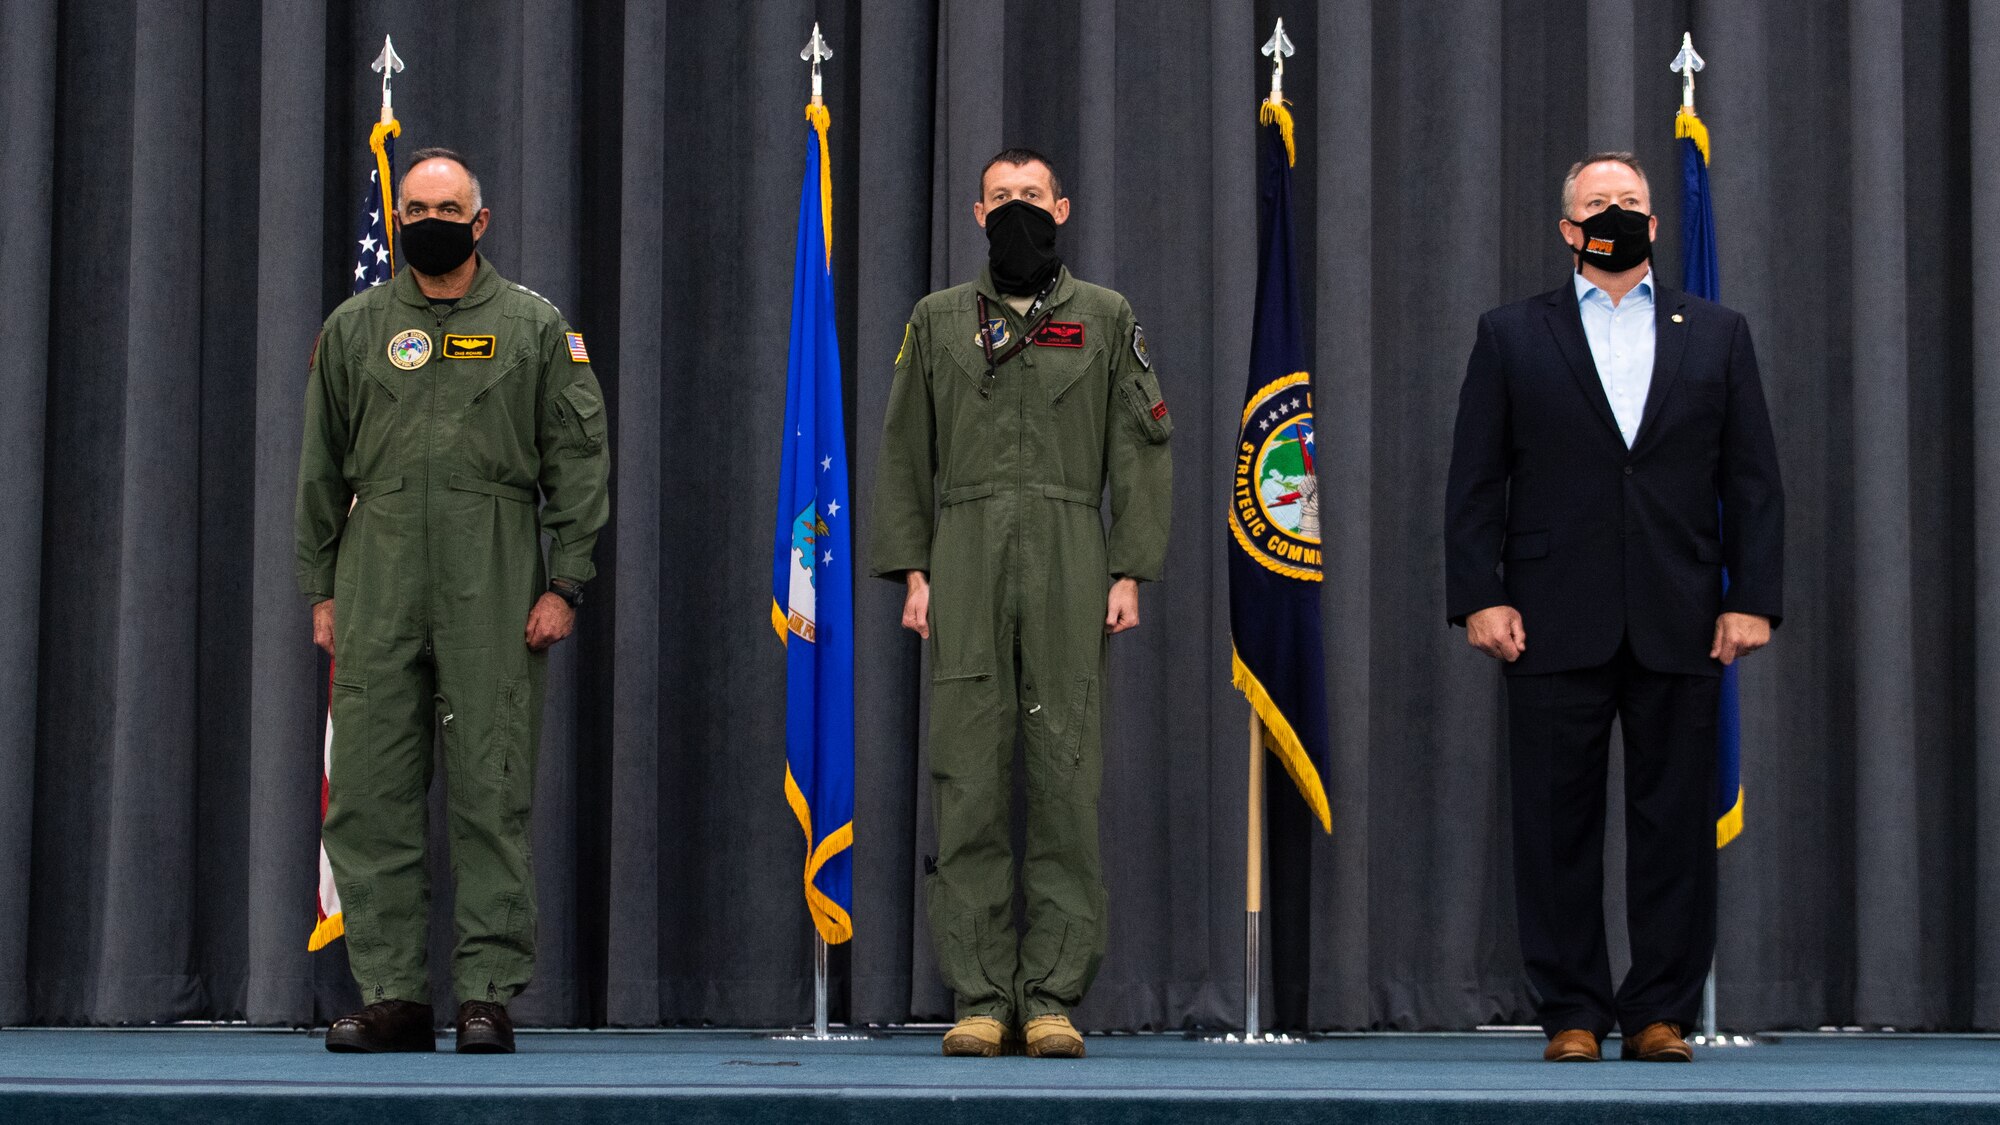 (Left to right) Adm. Charles Richard, U.S. Strategic Command commander, Lt. Col. Christopher Duff, 96th Bomb Squadron commander, and Mr. Tim Burke, Strategic Command Consultation Committee chairman, stand at the position of attention during the presentation of the Omaha Trophy to the 96th BS at Barksdale Air Force Base, Louisiana, March 30, 2021.The Omaha Trophy is awarded each year to various units in recognition of outstanding support to USSTRATCOM's strategic deterrence mission (U.S. Air Force photo by Airman 1st Class Jacob B. Wrightsman)